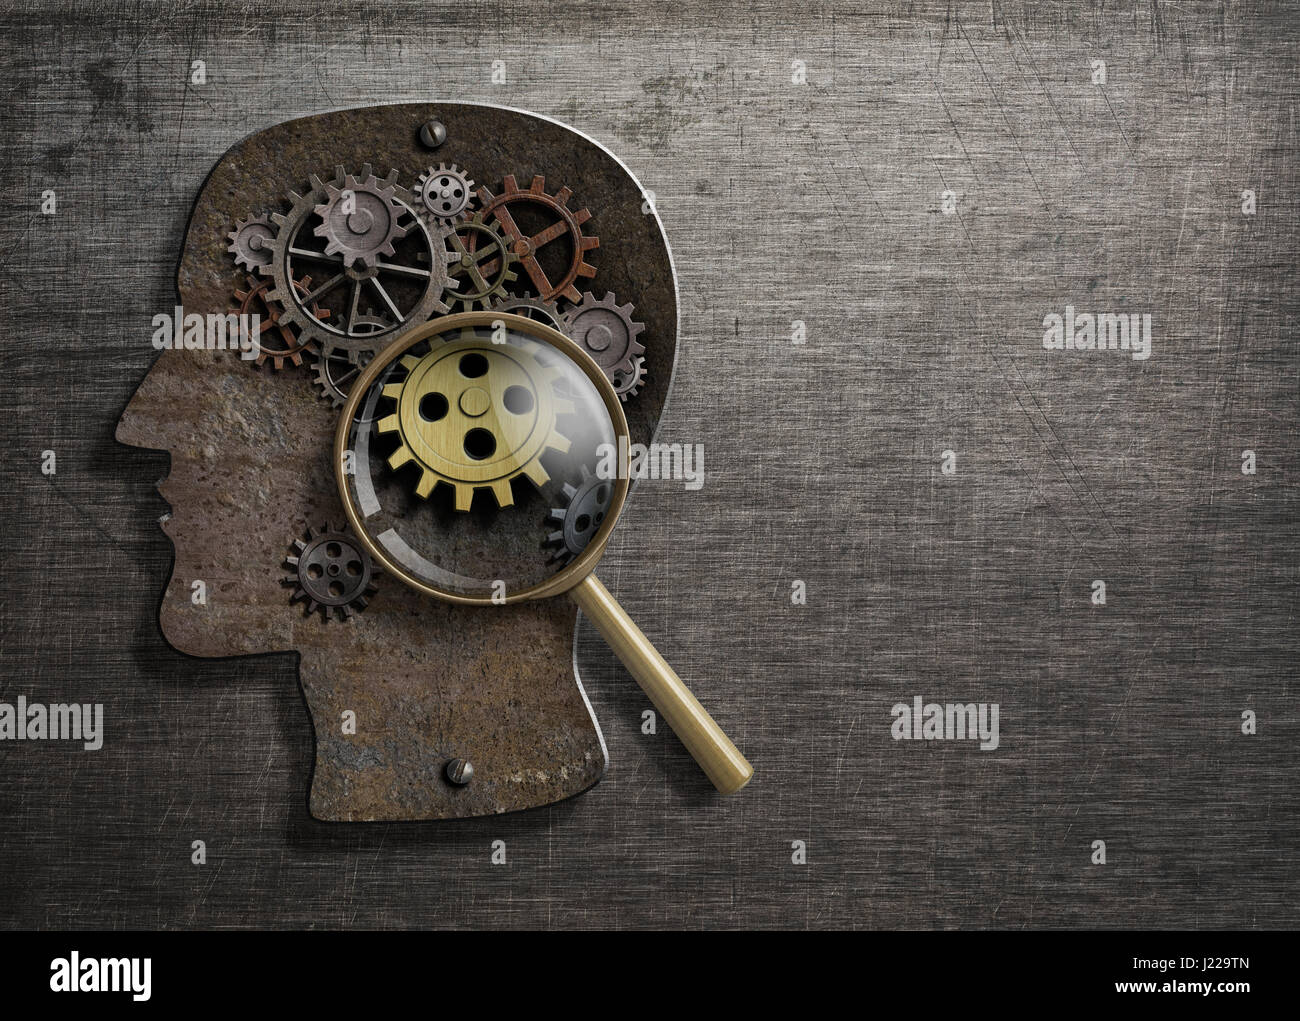 Psychology or invent concept. Brain model with magnifying glass 3d illustration. Stock Photo